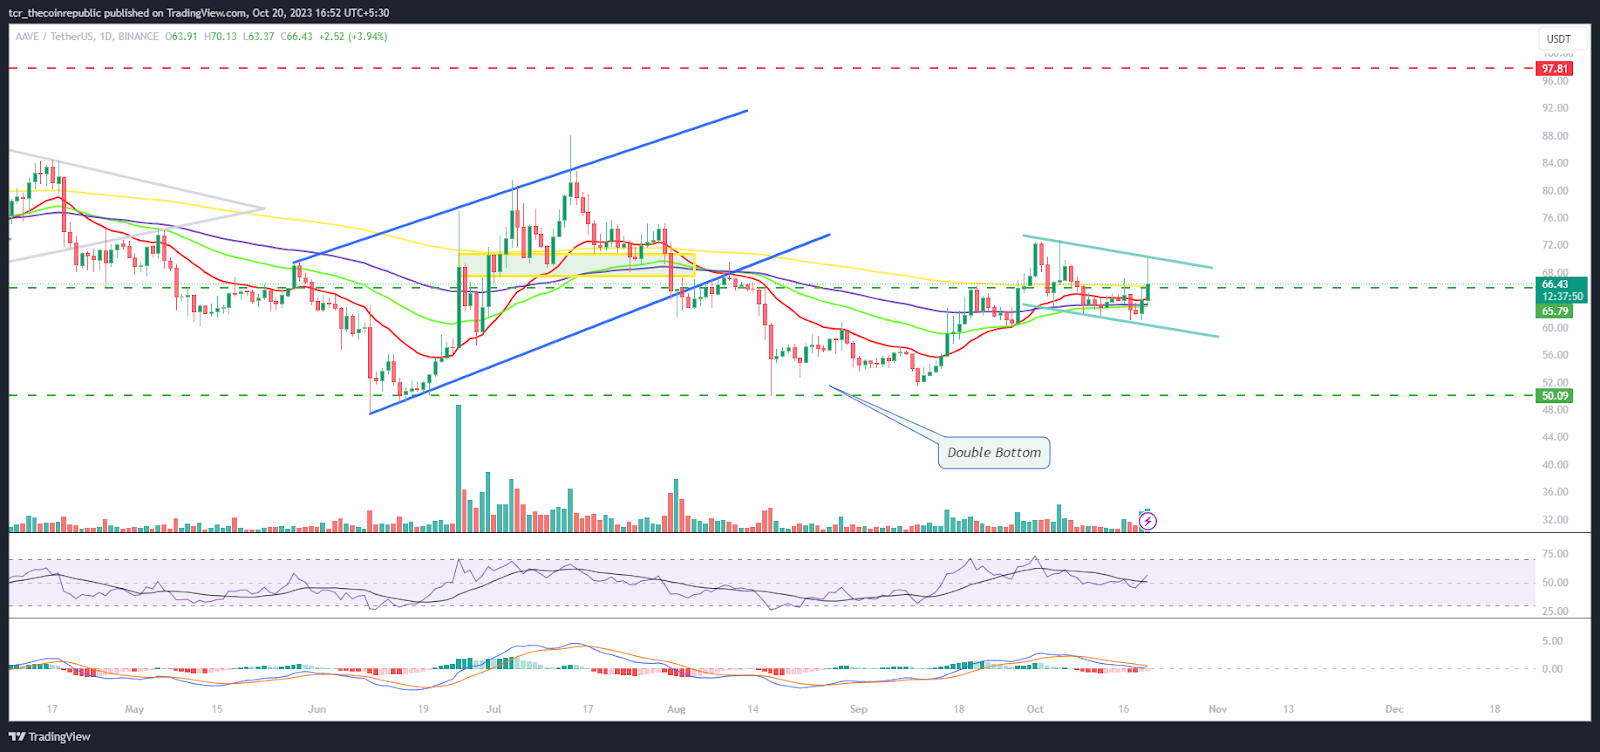 AAVE Price Analysis: Will AAVE Surpass $70 or Drags With Channel?